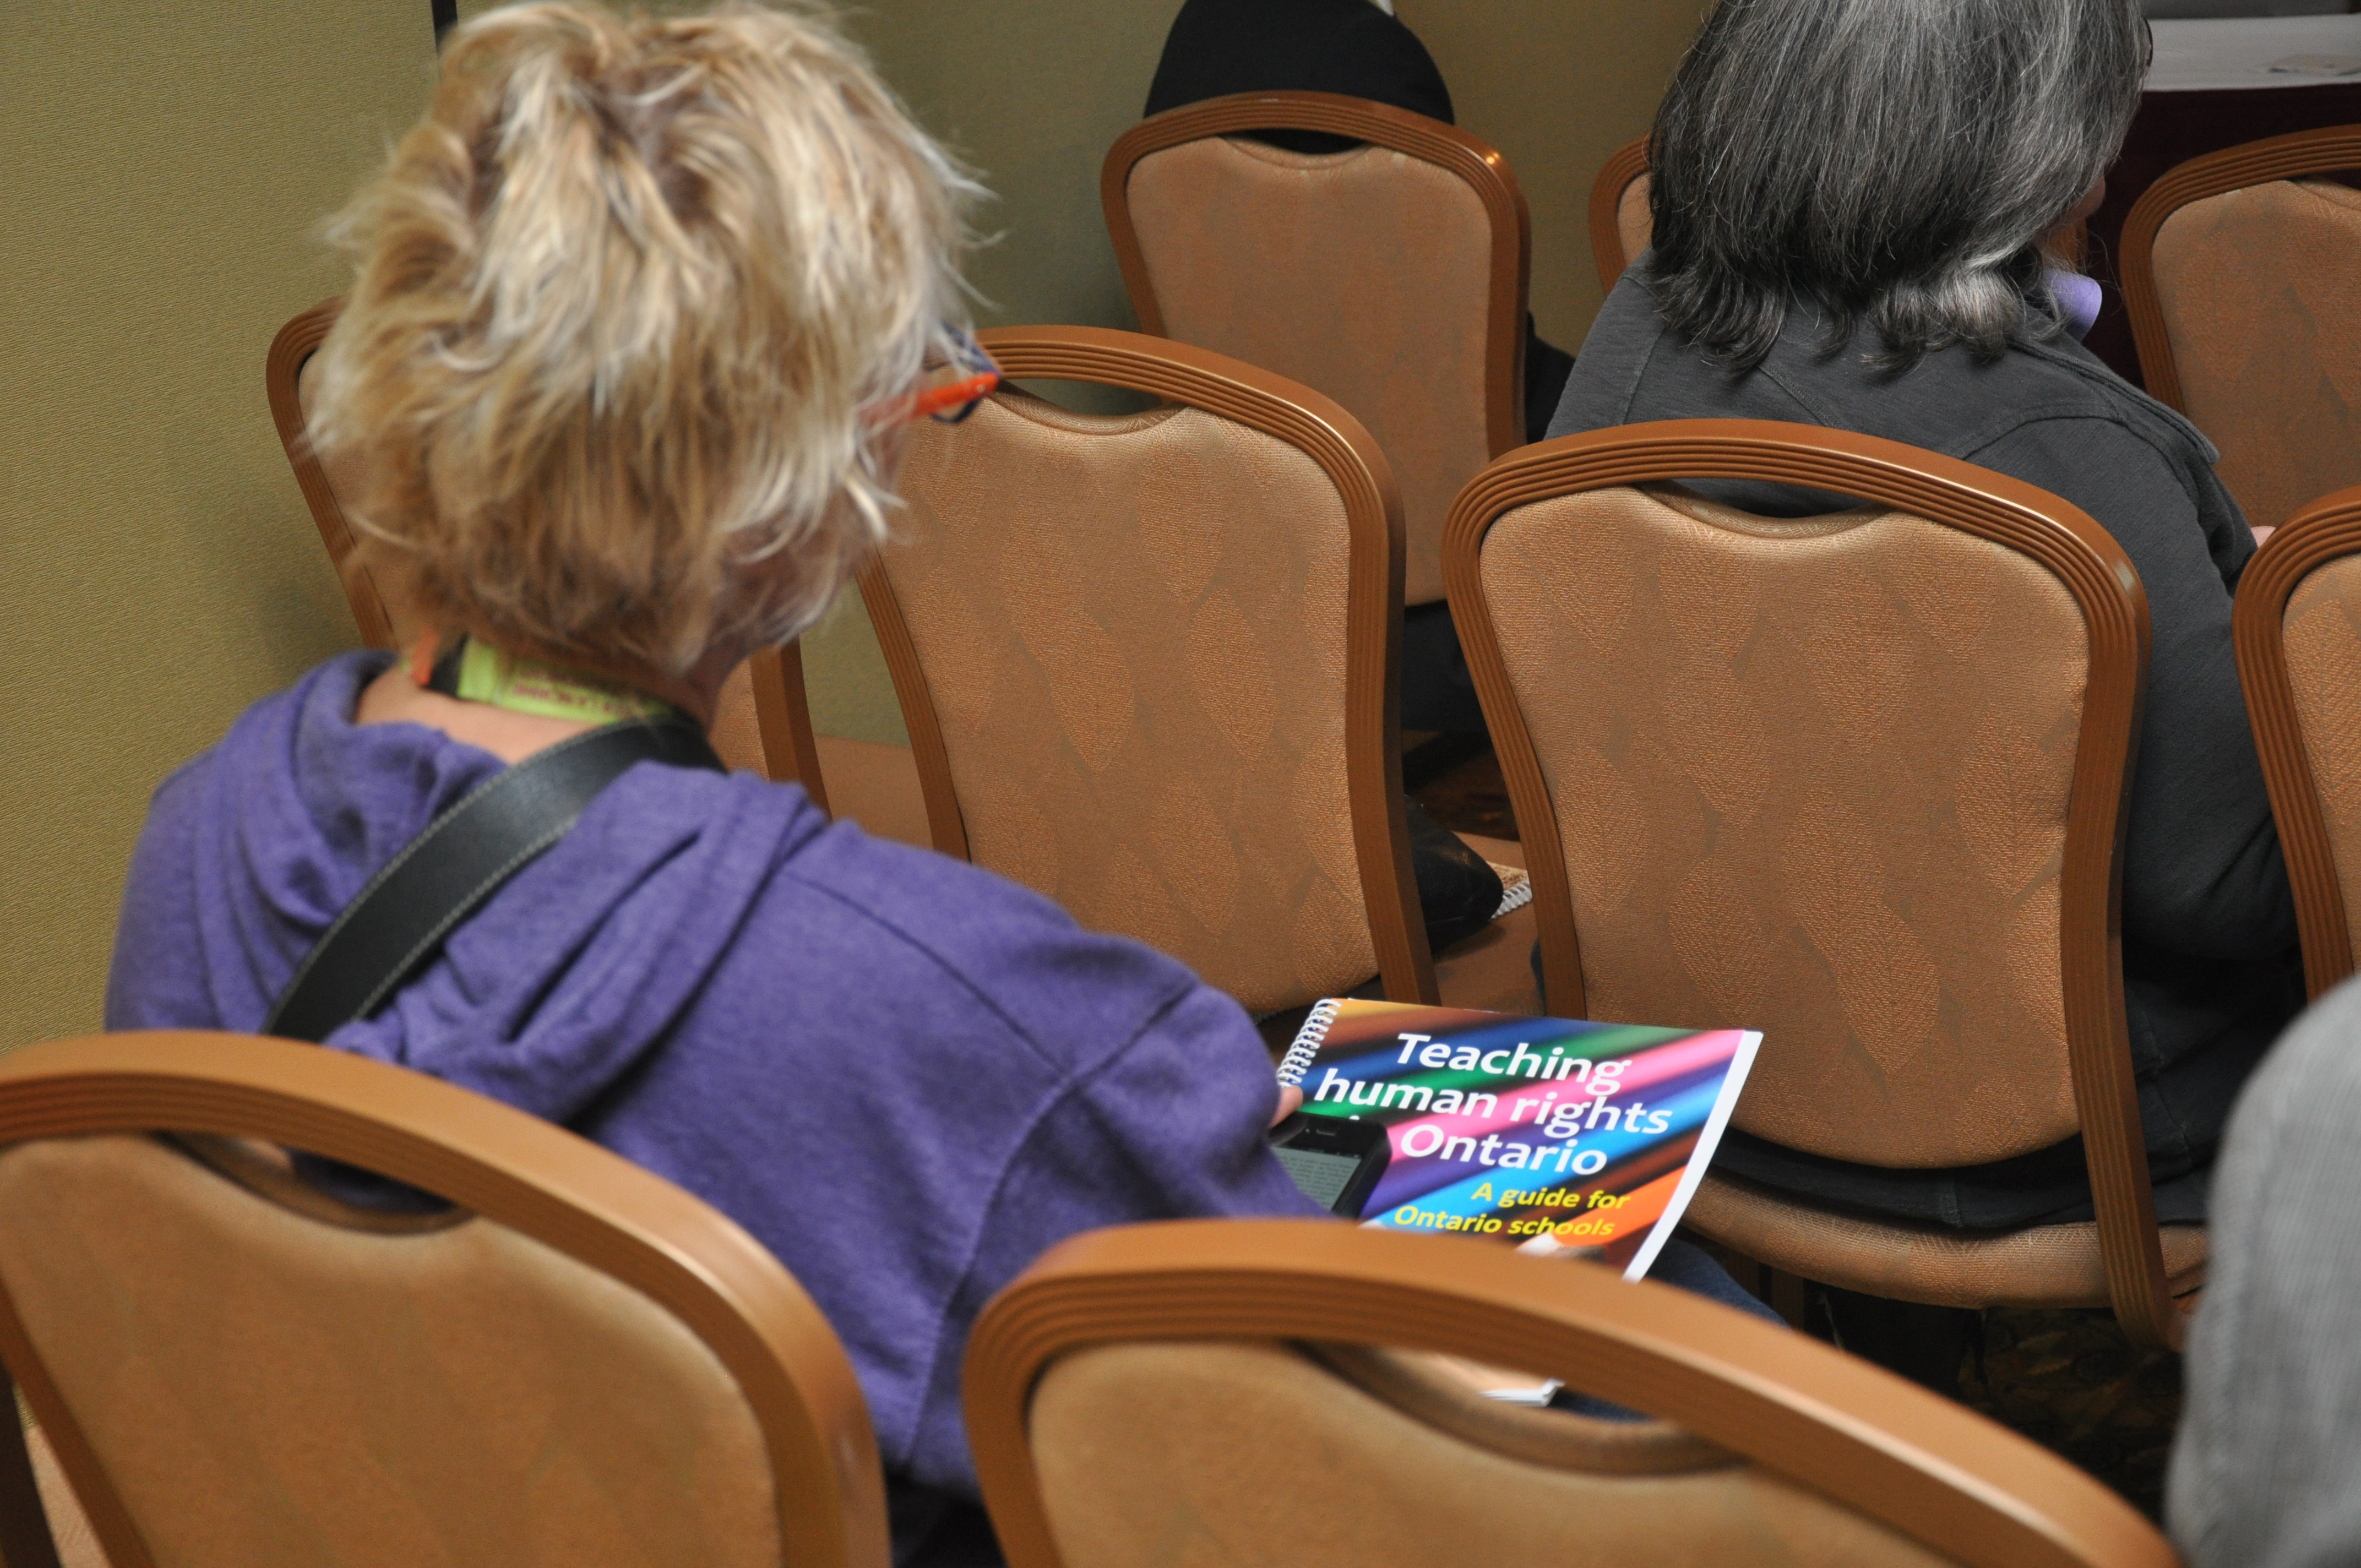 A woman holding a copy of Teaching human rights in Ontario sits in a chair.